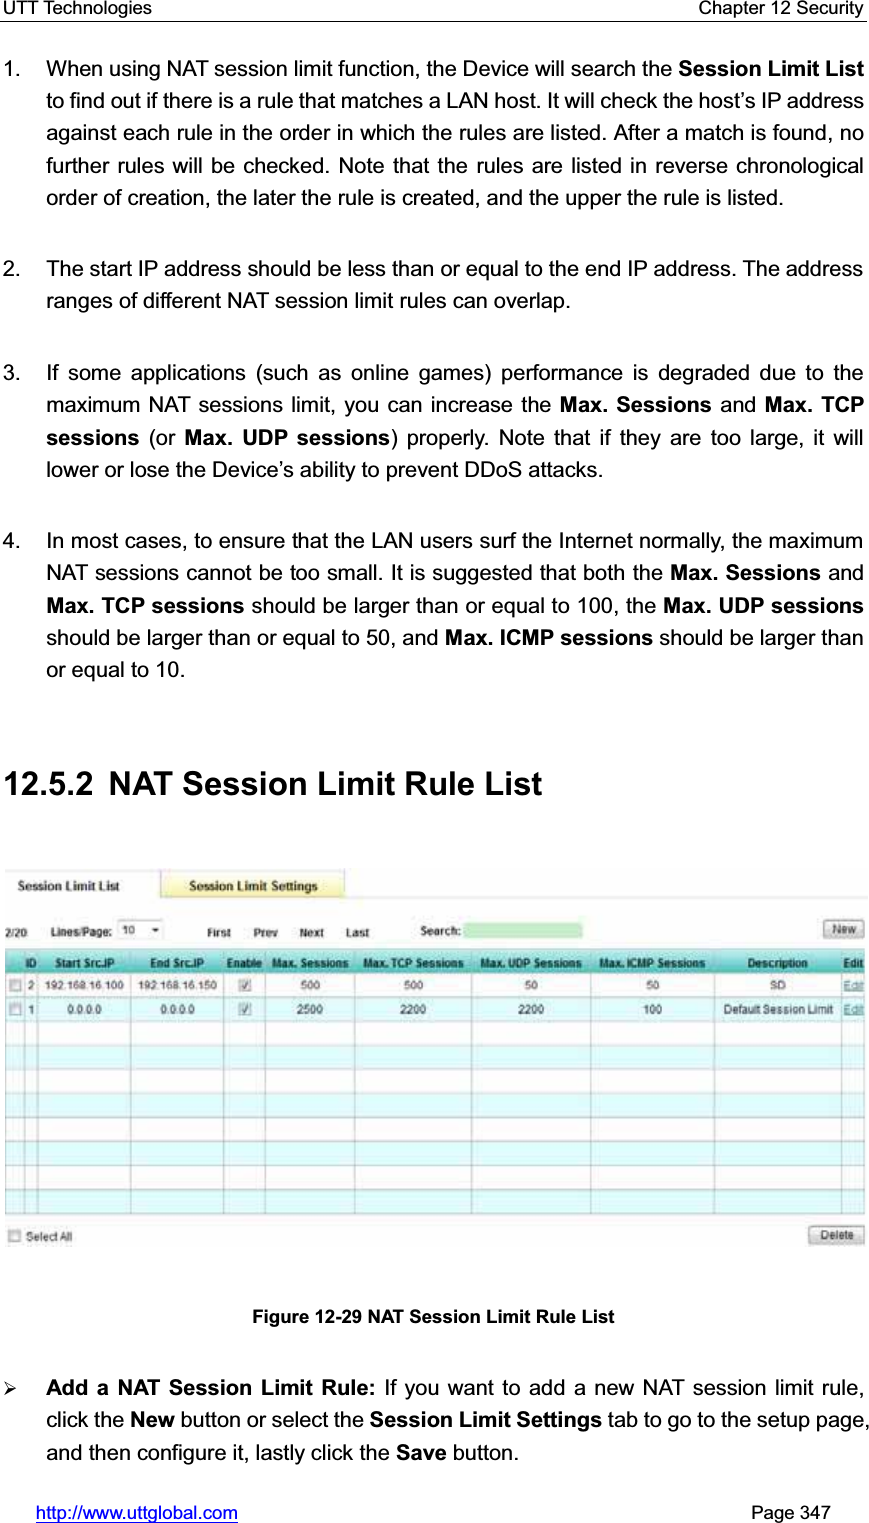 UTT Technologies    Chapter 12 Security   http://www.uttglobal.com                                                       Page 347 1.  When using NAT session limit function, the Device will search the Session Limit List to find out if there is a rule that matches a LAN host. It will check the host¶s IP address against each rule in the order in which the rules are listed. After a match is found, no further rules will be checked. Note that the rules are listed in reverse chronological order of creation, the later the rule is created, and the upper the rule is listed. 2.  The start IP address should be less than or equal to the end IP address. The address ranges of different NAT session limit rules can overlap. 3.  If some applications (such as online games) performance is degraded due to the maximum NAT sessions limit, you can increase the Max. Sessions and Max. TCP sessions (or Max. UDP sessions) properly. Note that if they are too large, it will lower or lose the Device¶s ability to prevent DDoS attacks.   4.  In most cases, to ensure that the LAN users surf the Internet normally, the maximum NAT sessions cannot be too small. It is suggested that both the Max. Sessions and Max. TCP sessions should be larger than or equal to 100, the Max. UDP sessionsshould be larger than or equal to 50, and Max. ICMP sessions should be larger than or equal to 10.   12.5.2  NAT Session Limit Rule List Figure 12-29 NAT Session Limit Rule List¾Add a NAT Session Limit Rule: If you want to add a new NAT session limit rule, click the New button or select the Session Limit Settings tab to go to the setup page, and then configure it, lastly click the Save button. 